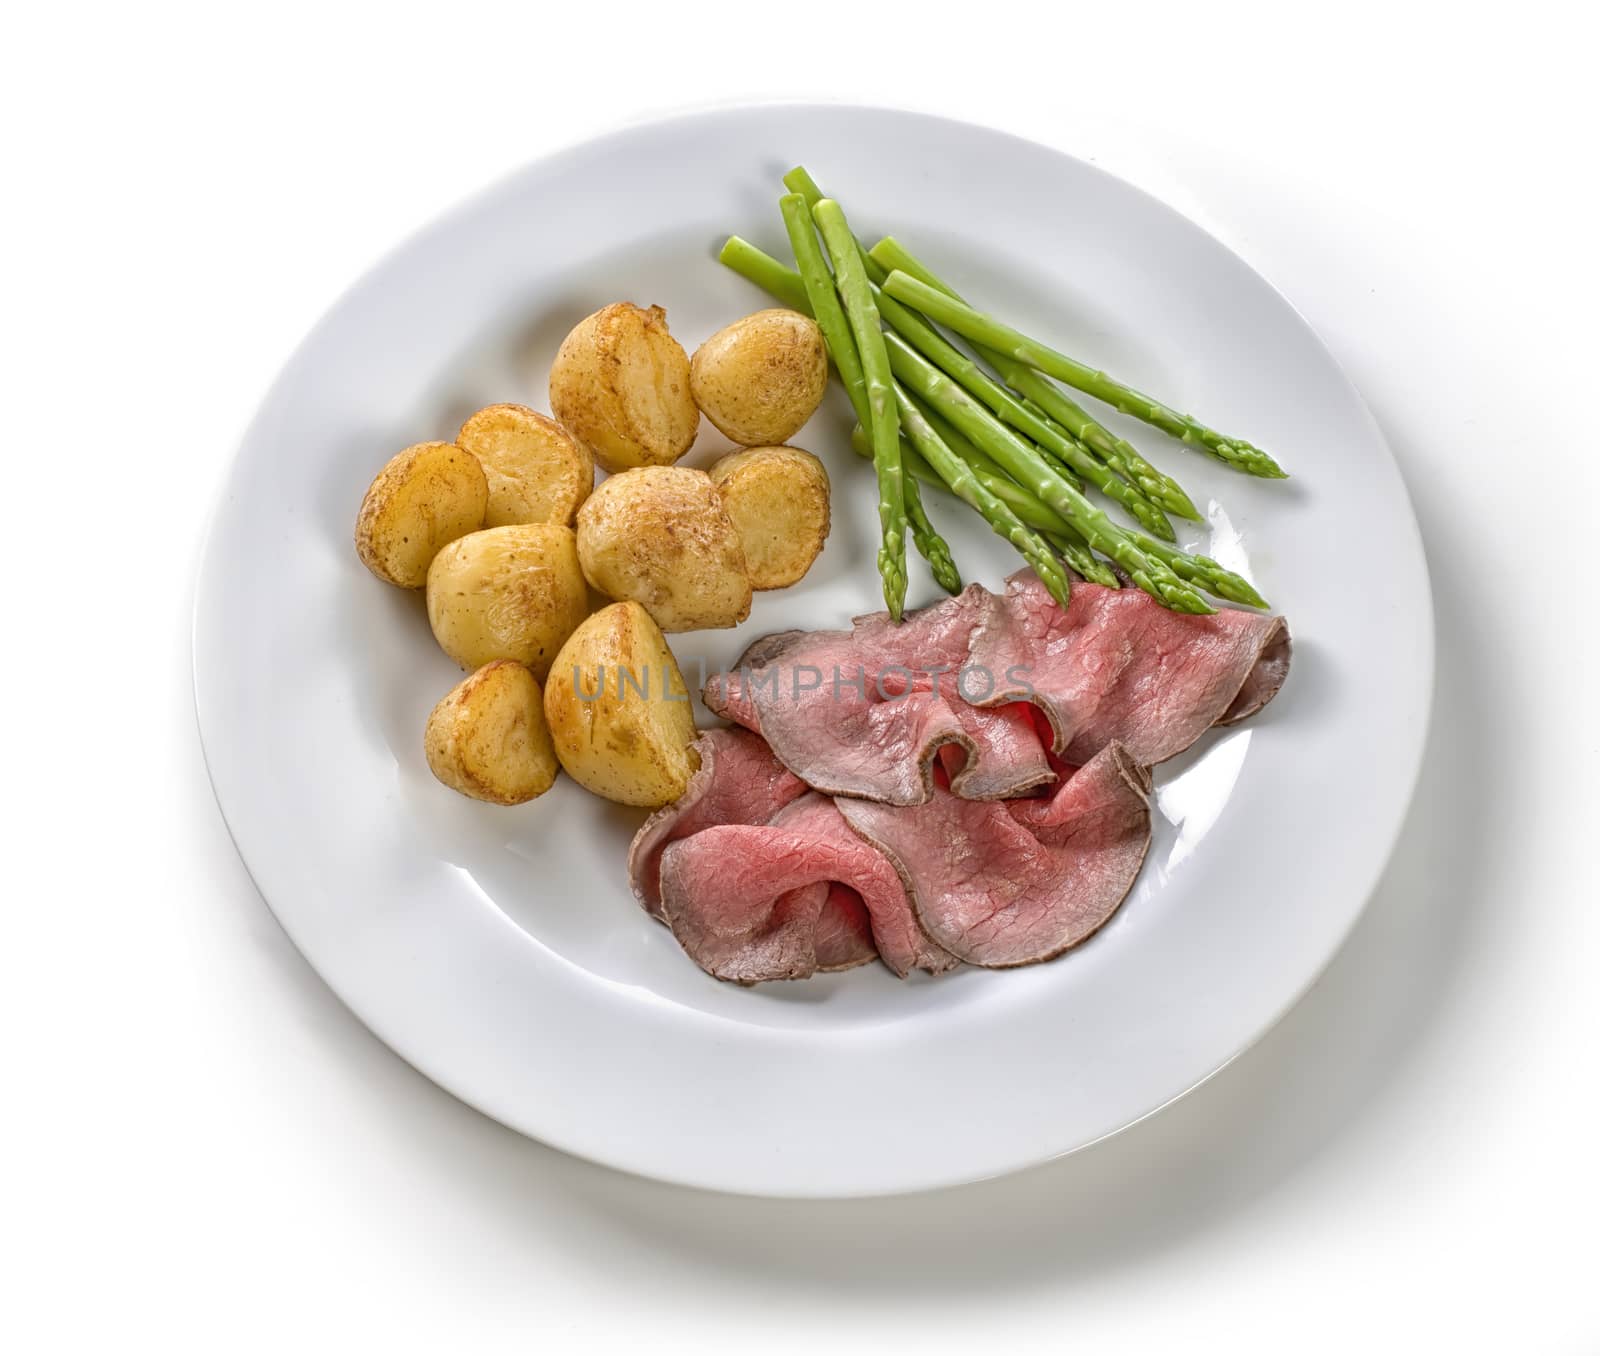 slices of roast beef with potatoes on a white plate
